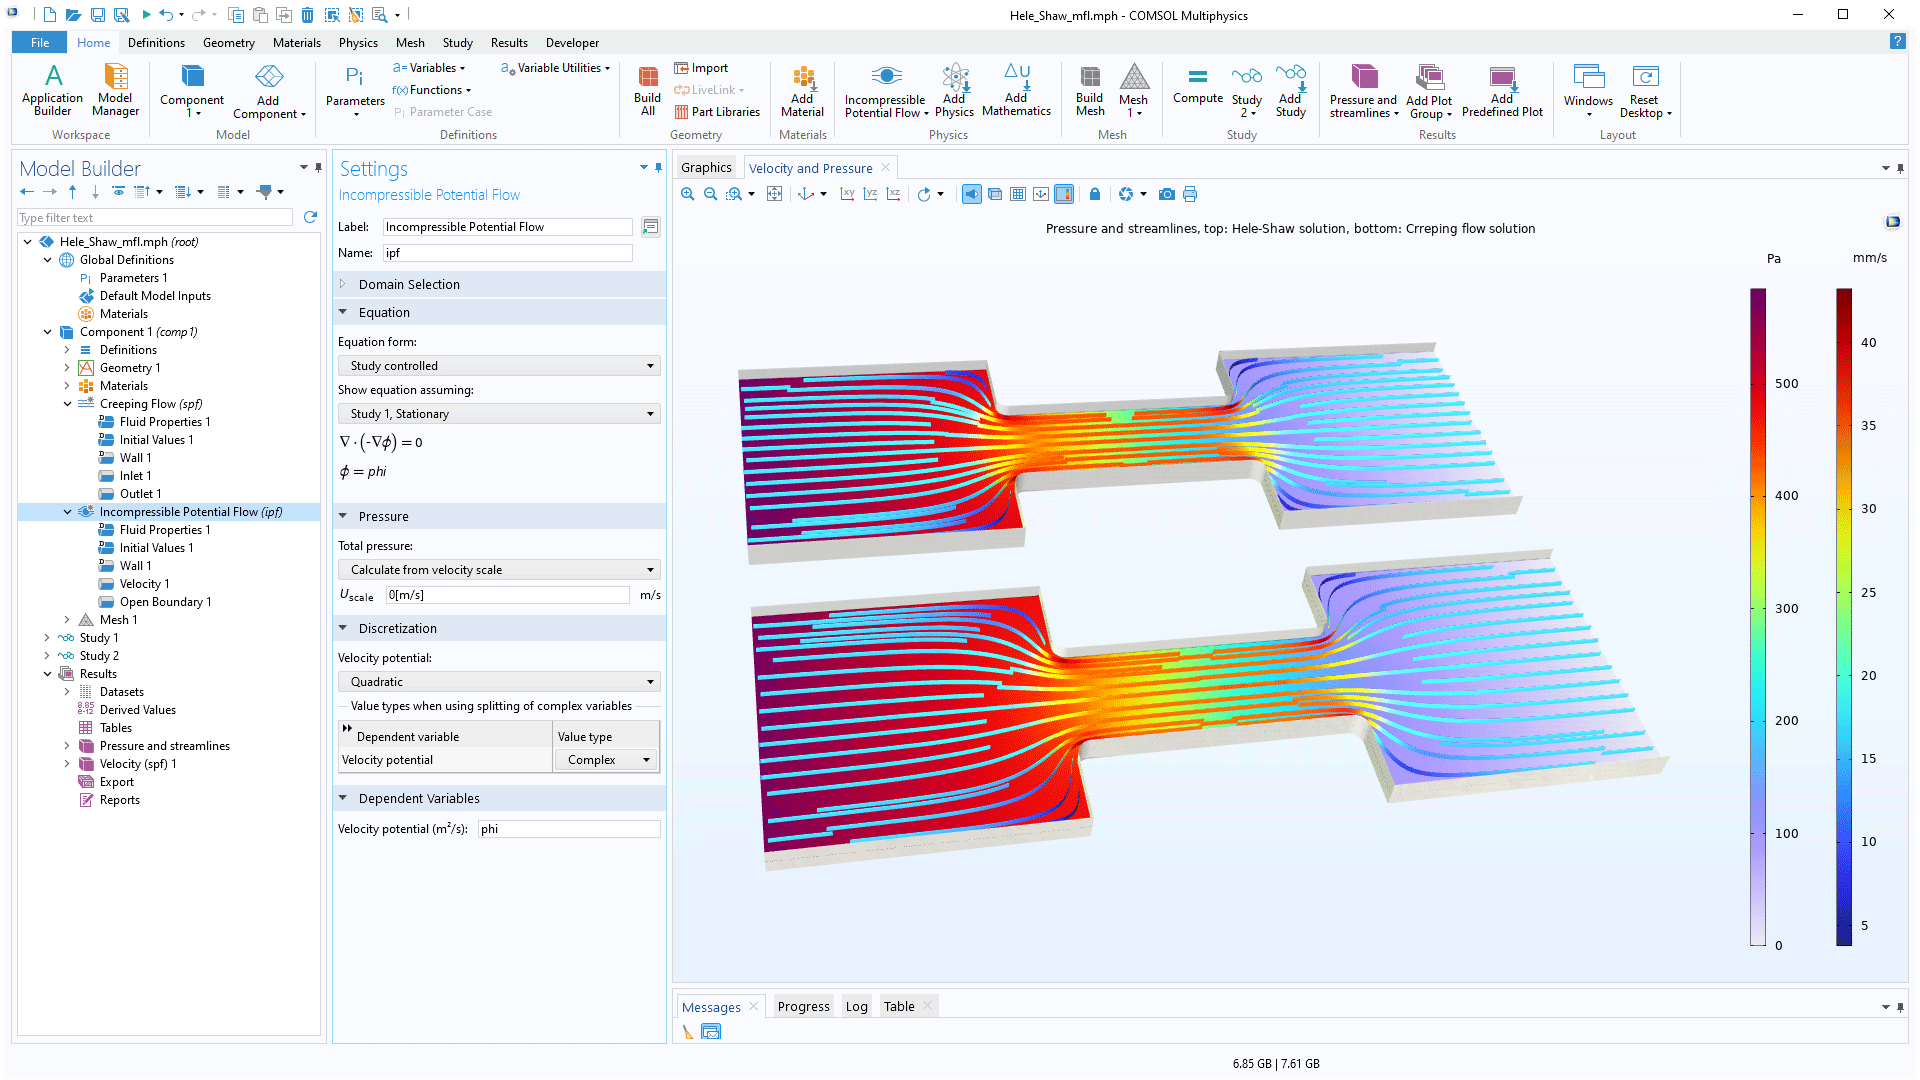 The COMSOL Multiphysics UI showing the Model Builder with the Incompressible Potential Flow node highlighted, the corresponding Settings window, and a Hele-Shaw model in the Graphics window.